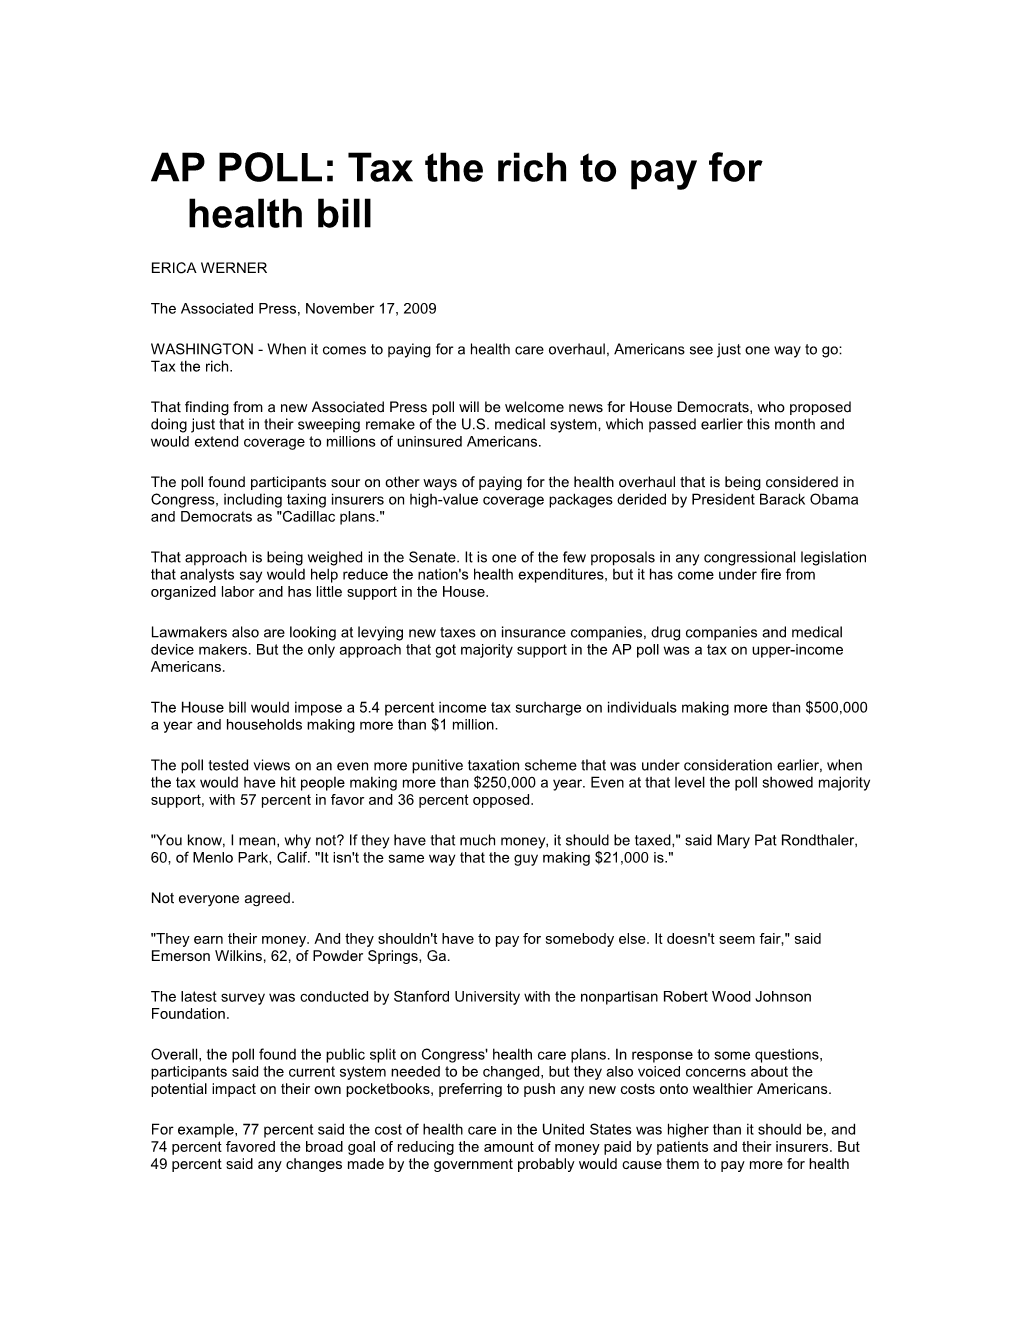 AP POLL: Tax the Rich to Pay for Health Bill